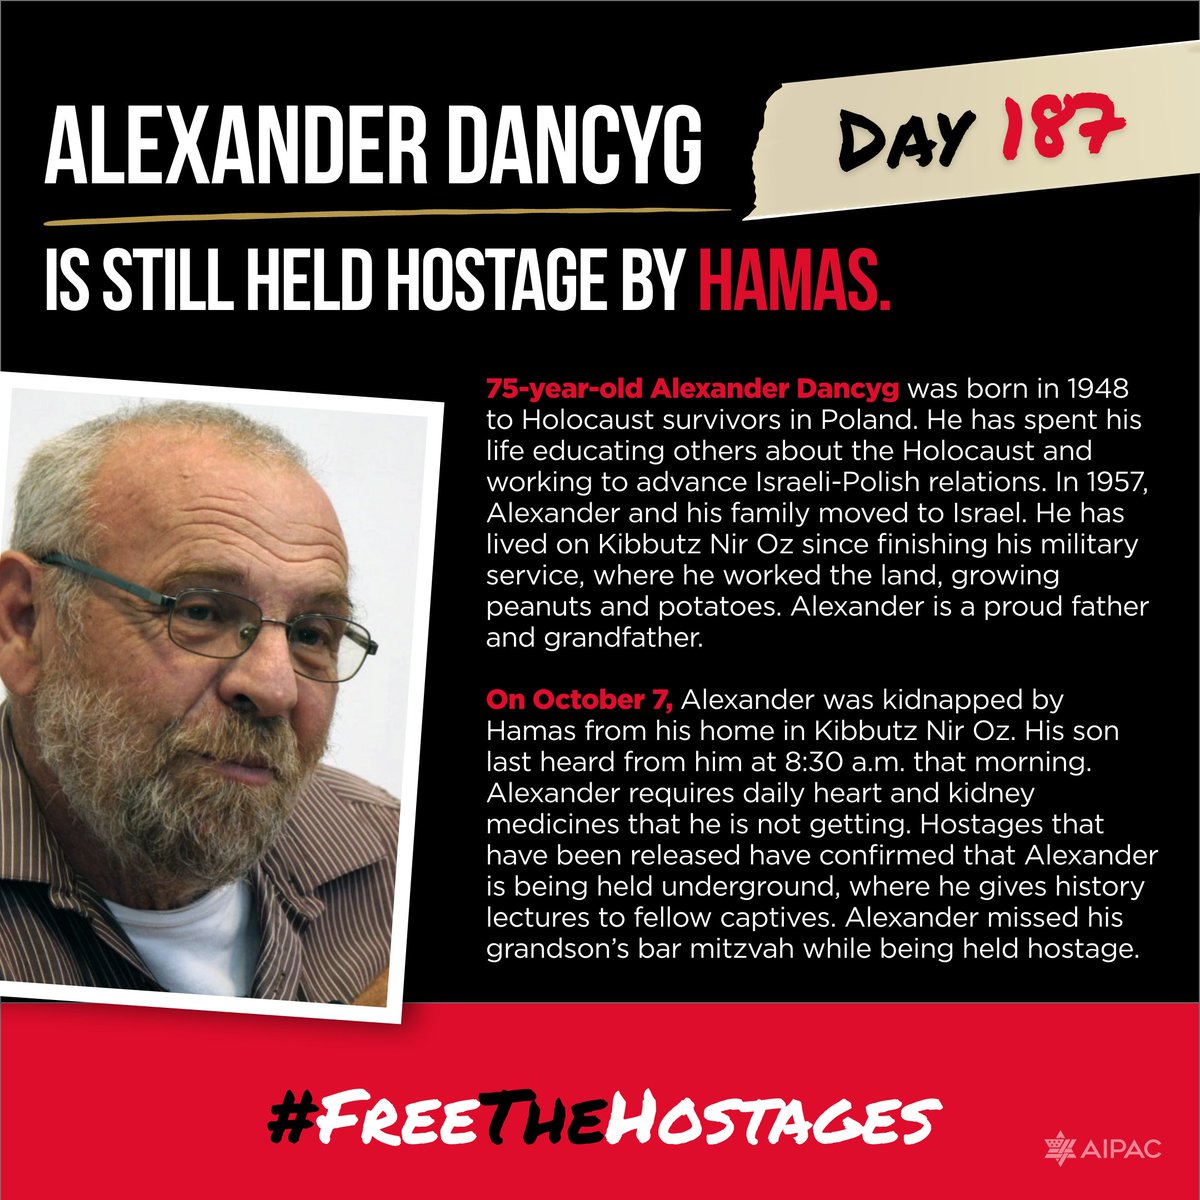 187 days. Alexander Dancyg is still held hostage by Hamas. Share his story. #FreeTheHostages @bringhomenow